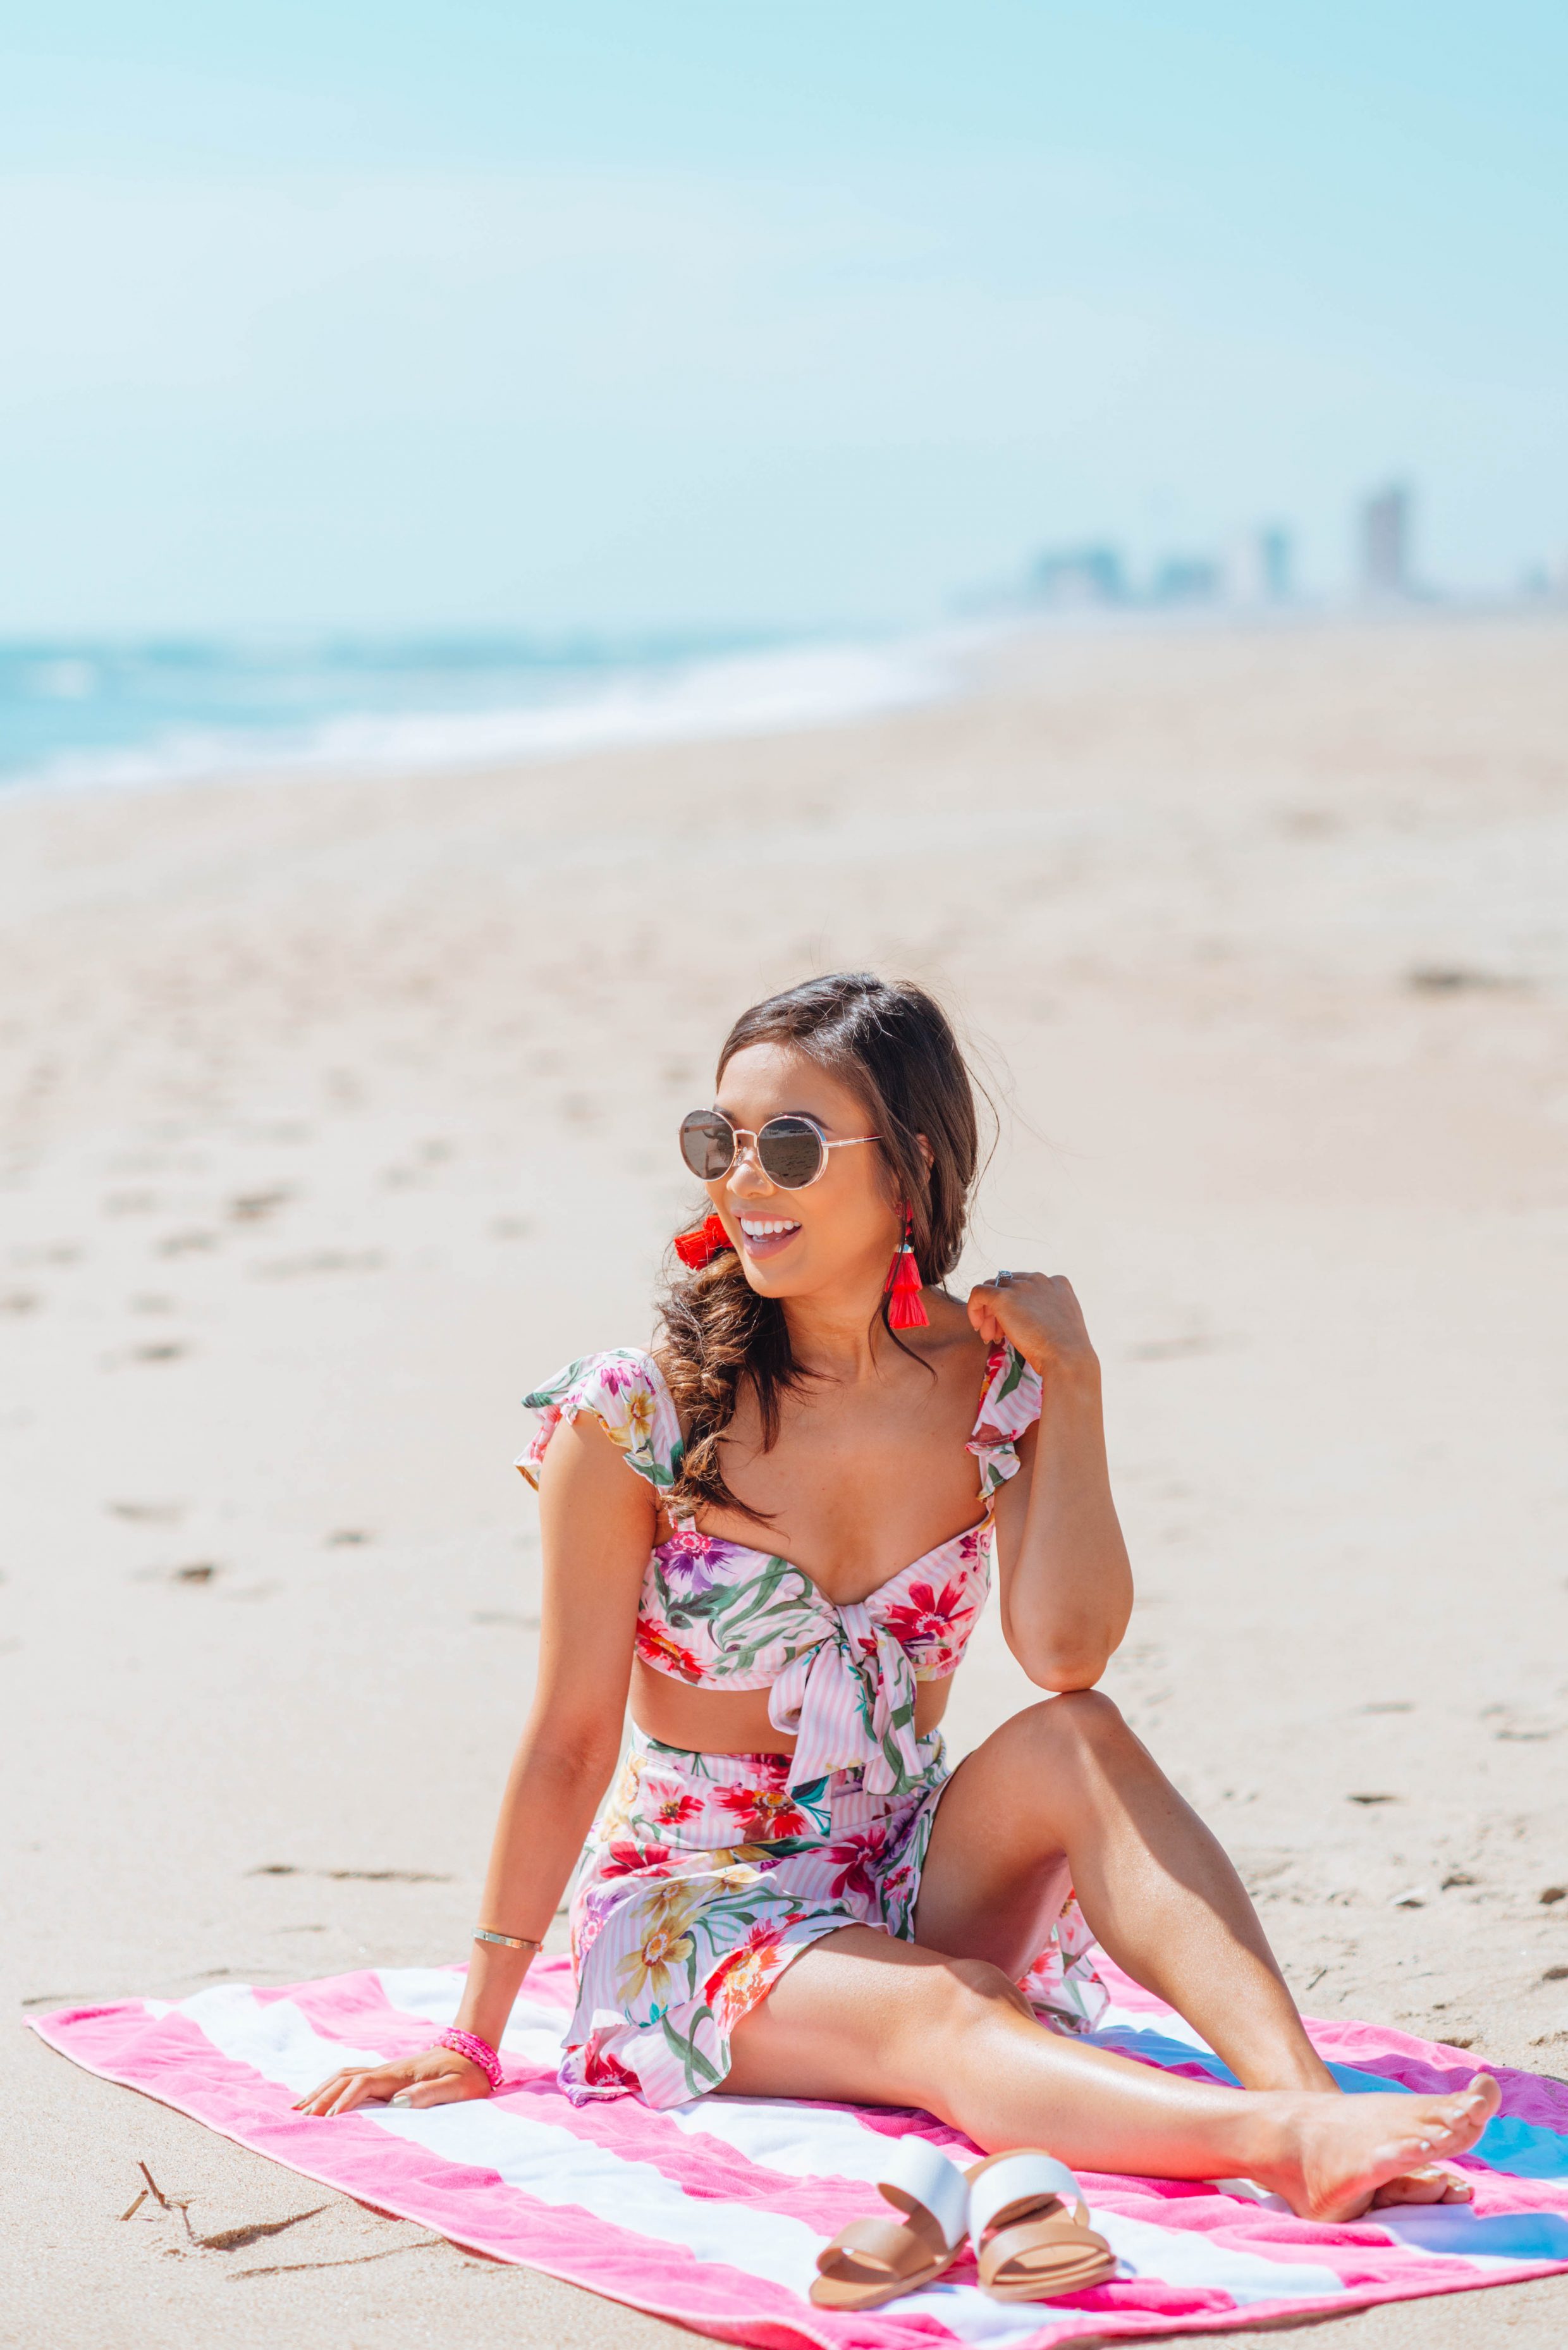 Floral two piece set with tassel earrings and a fishtail braid for the beach